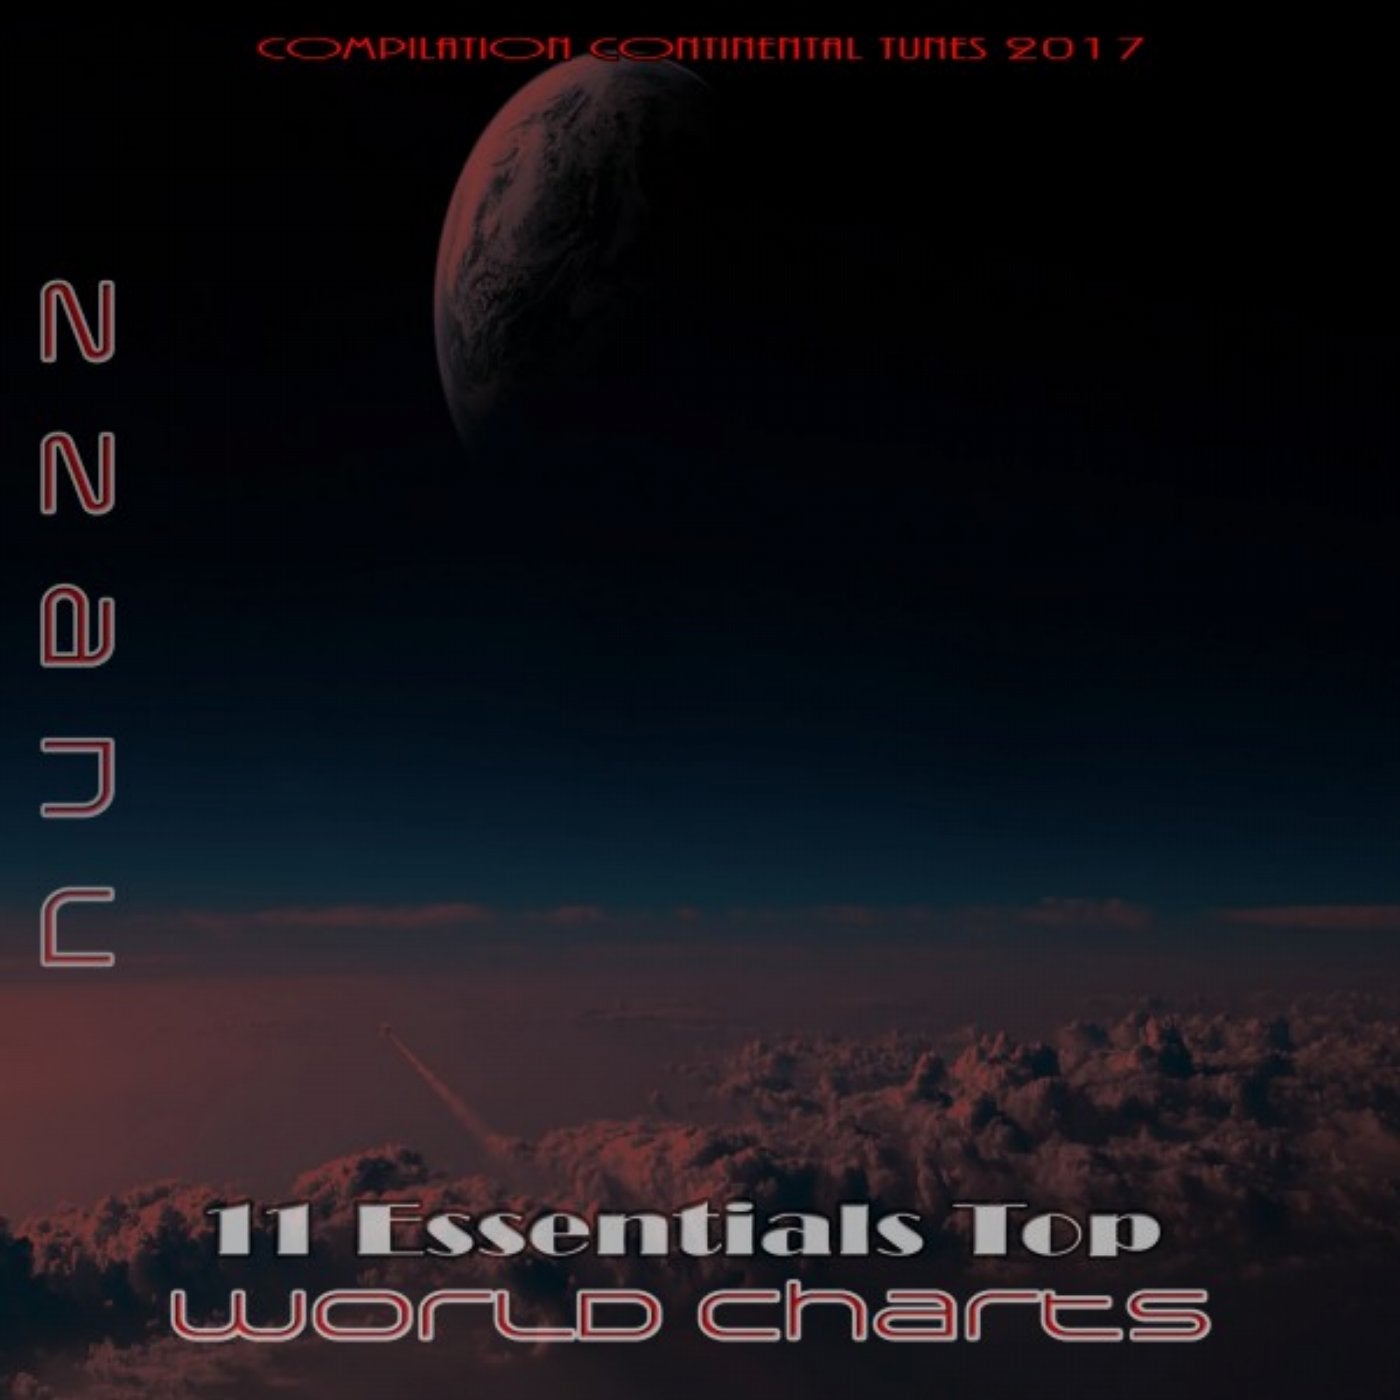 11 Essentials Top World Charts (Compilation Continental Tunes 2017)